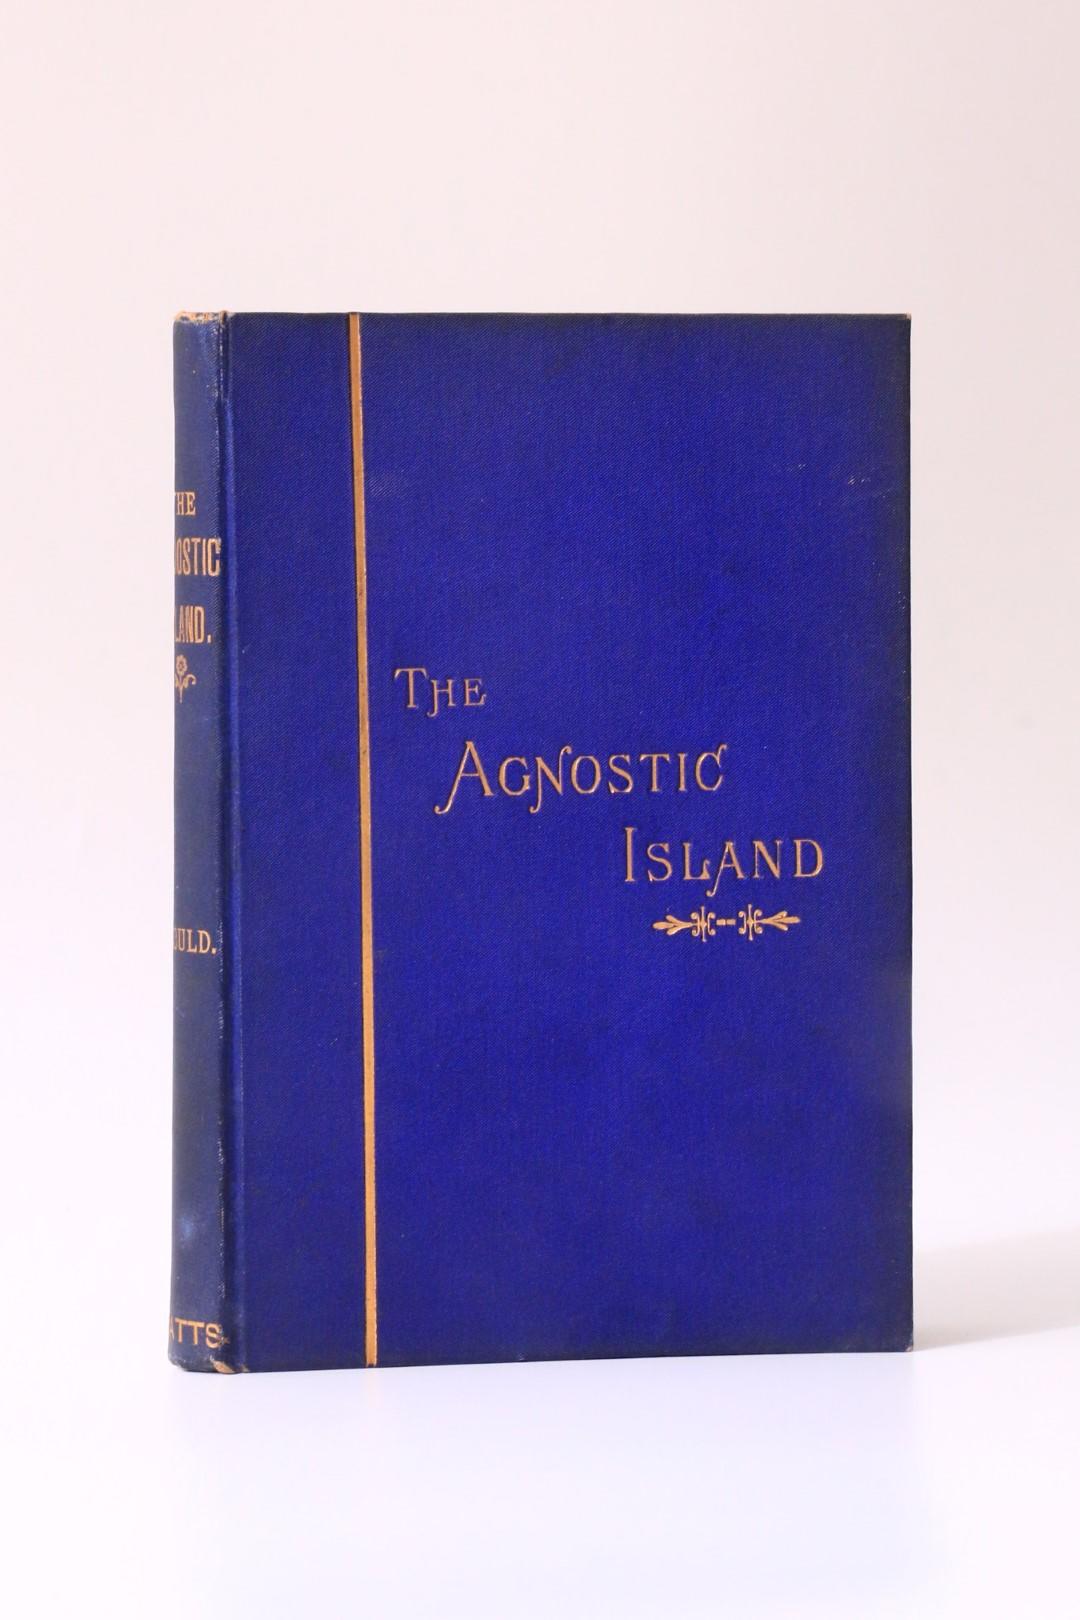 F.J. Gould - The Agnostic Island - Watts & Co., 1891, First Edition.